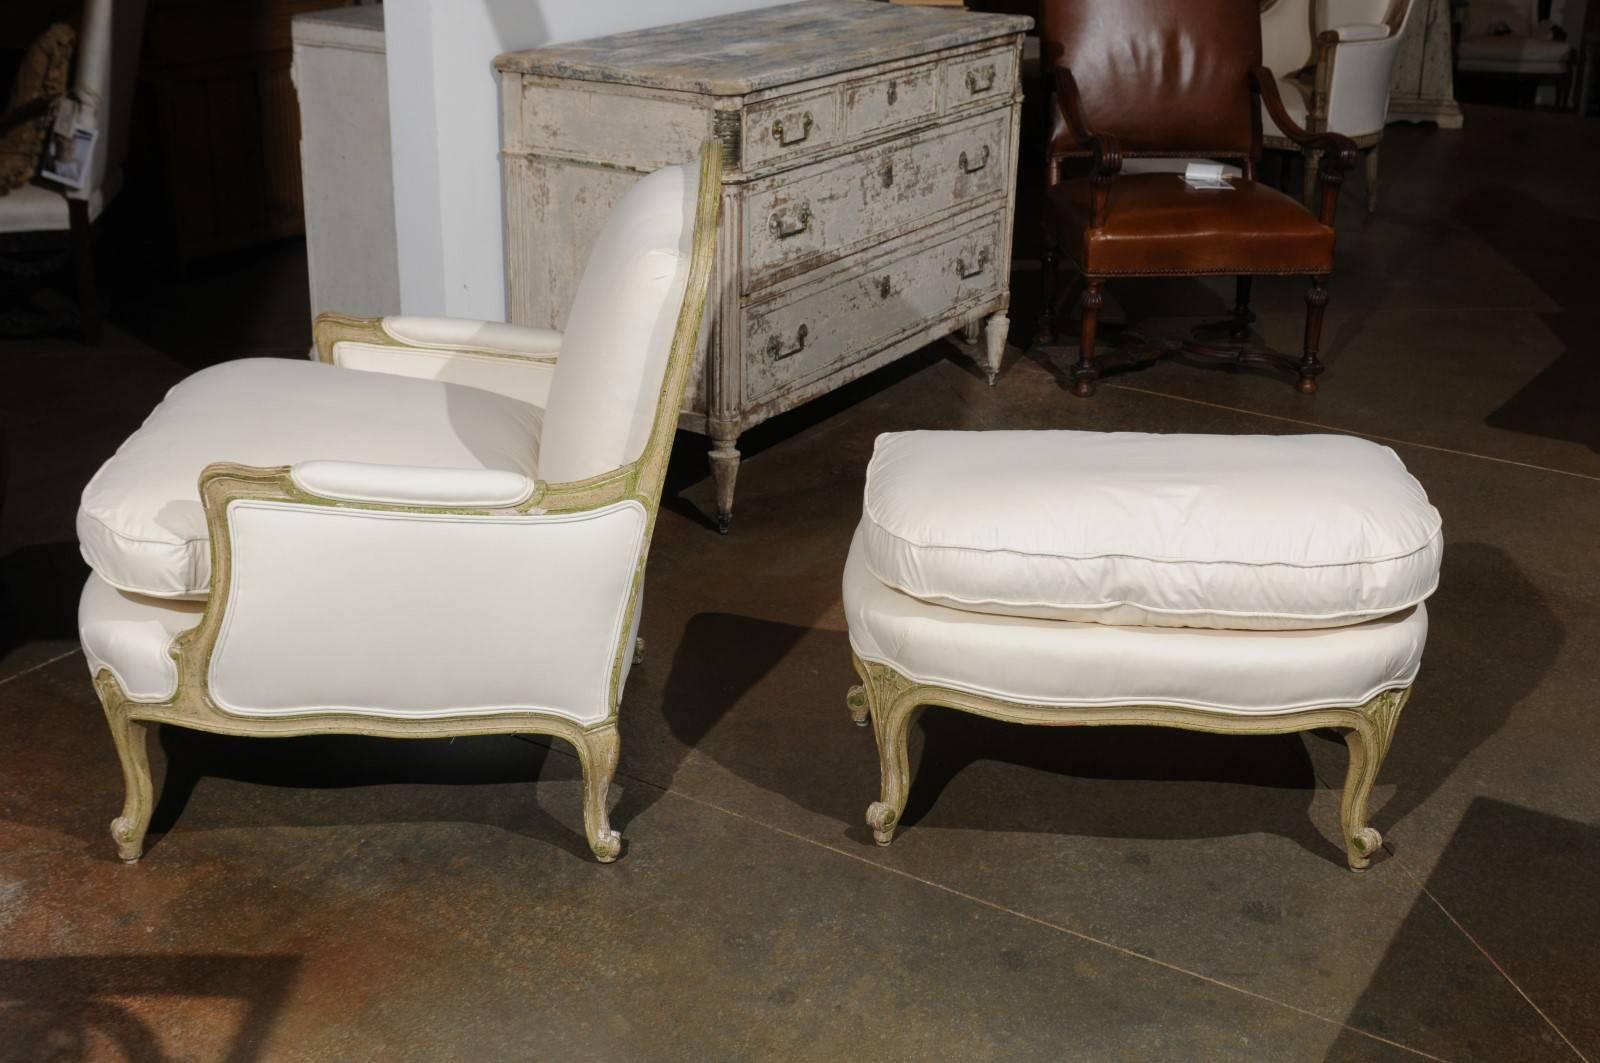 A French Louis XV period painted wood bergère chair with its ottoman from the mid-18th century with new upholstery. This French bergère chair features a light grey green painted body made of a slightly slanted back and partially upholstered arms.